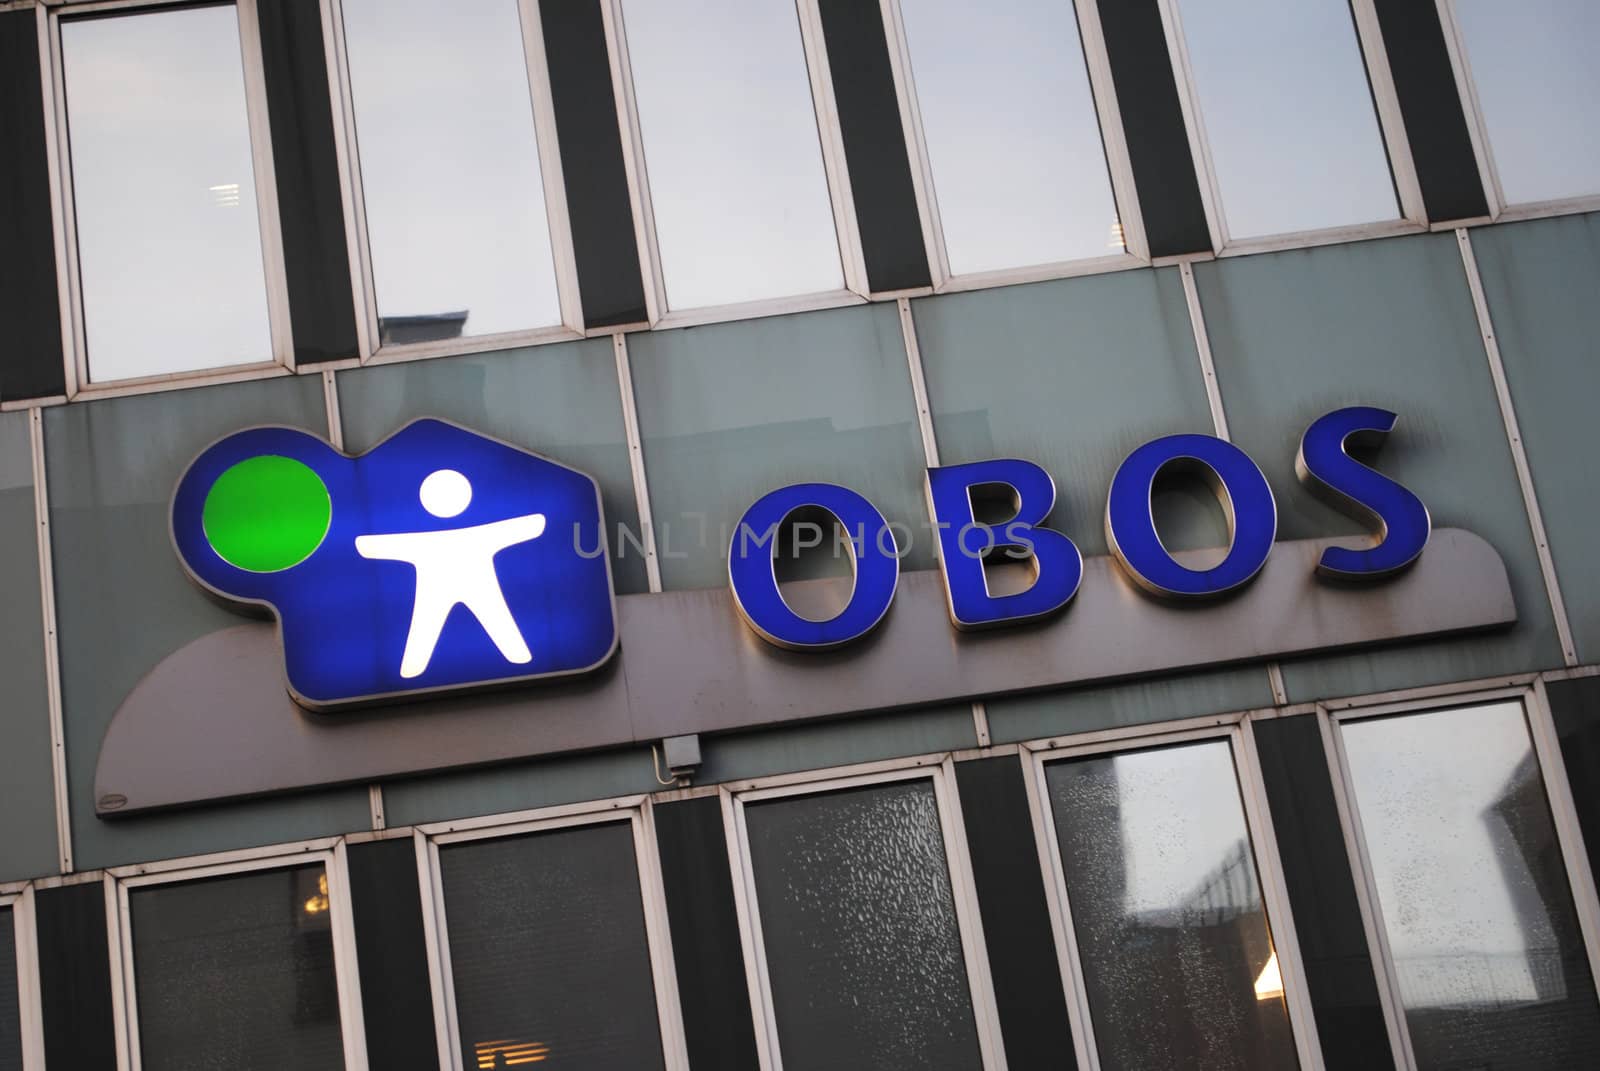 Oslo Bolig- og Sparelag (OBOS) is a norwegian housing society, founded in 1929. OBOS has more than 280,000 members and manages 144,500 homes.